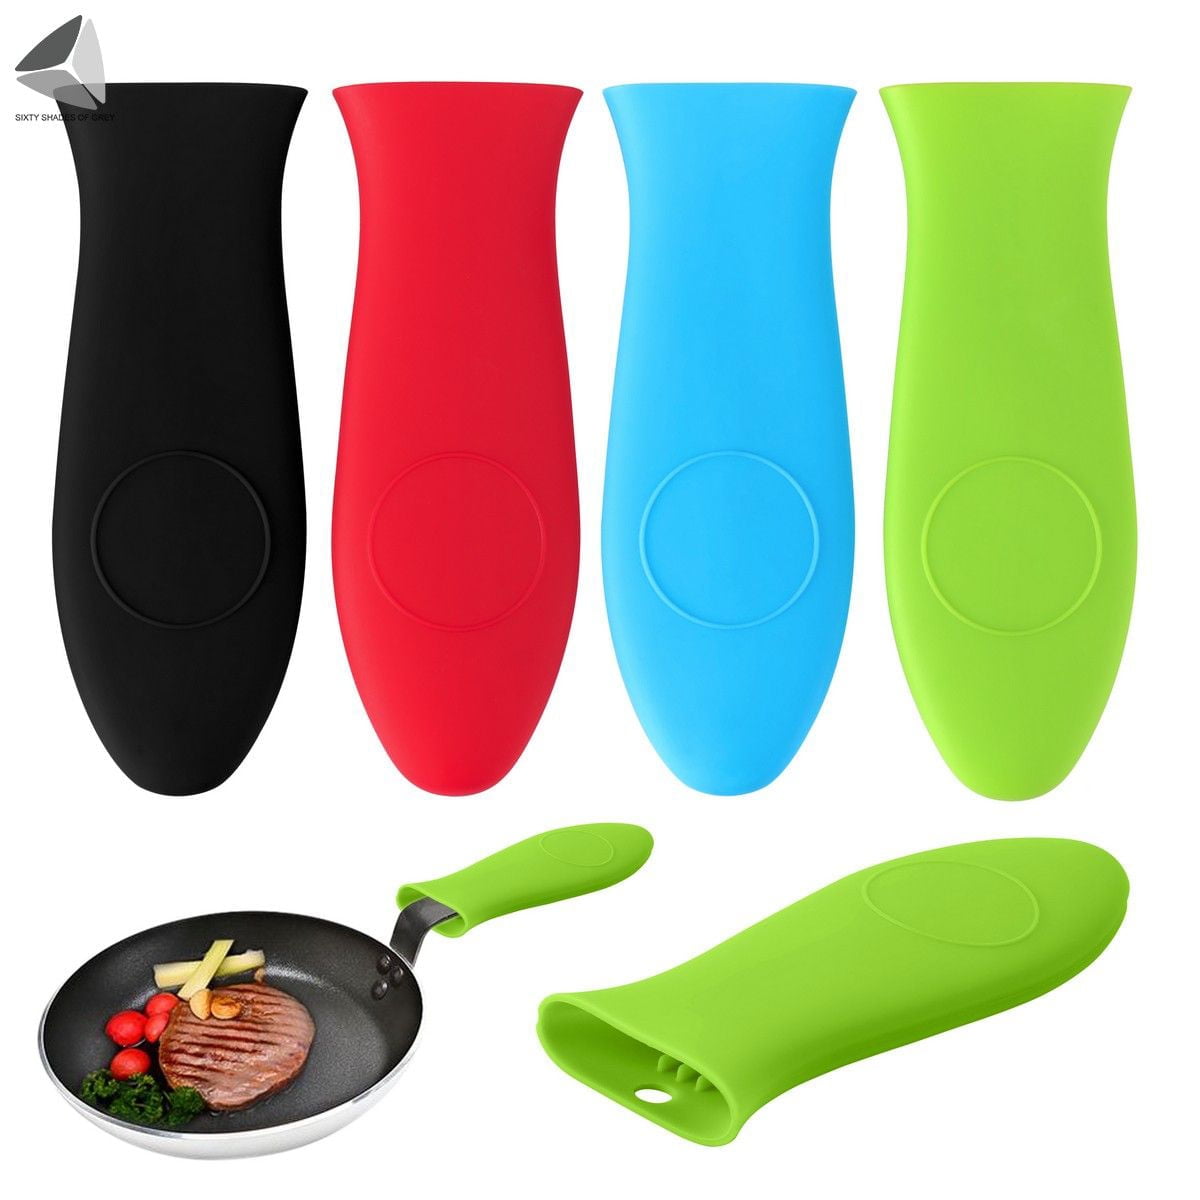 Pack of 4 Heat Protecting Silicone Handle Holder for Frying Pan Griddle Kettle 4-Pack Multi-Color in Black